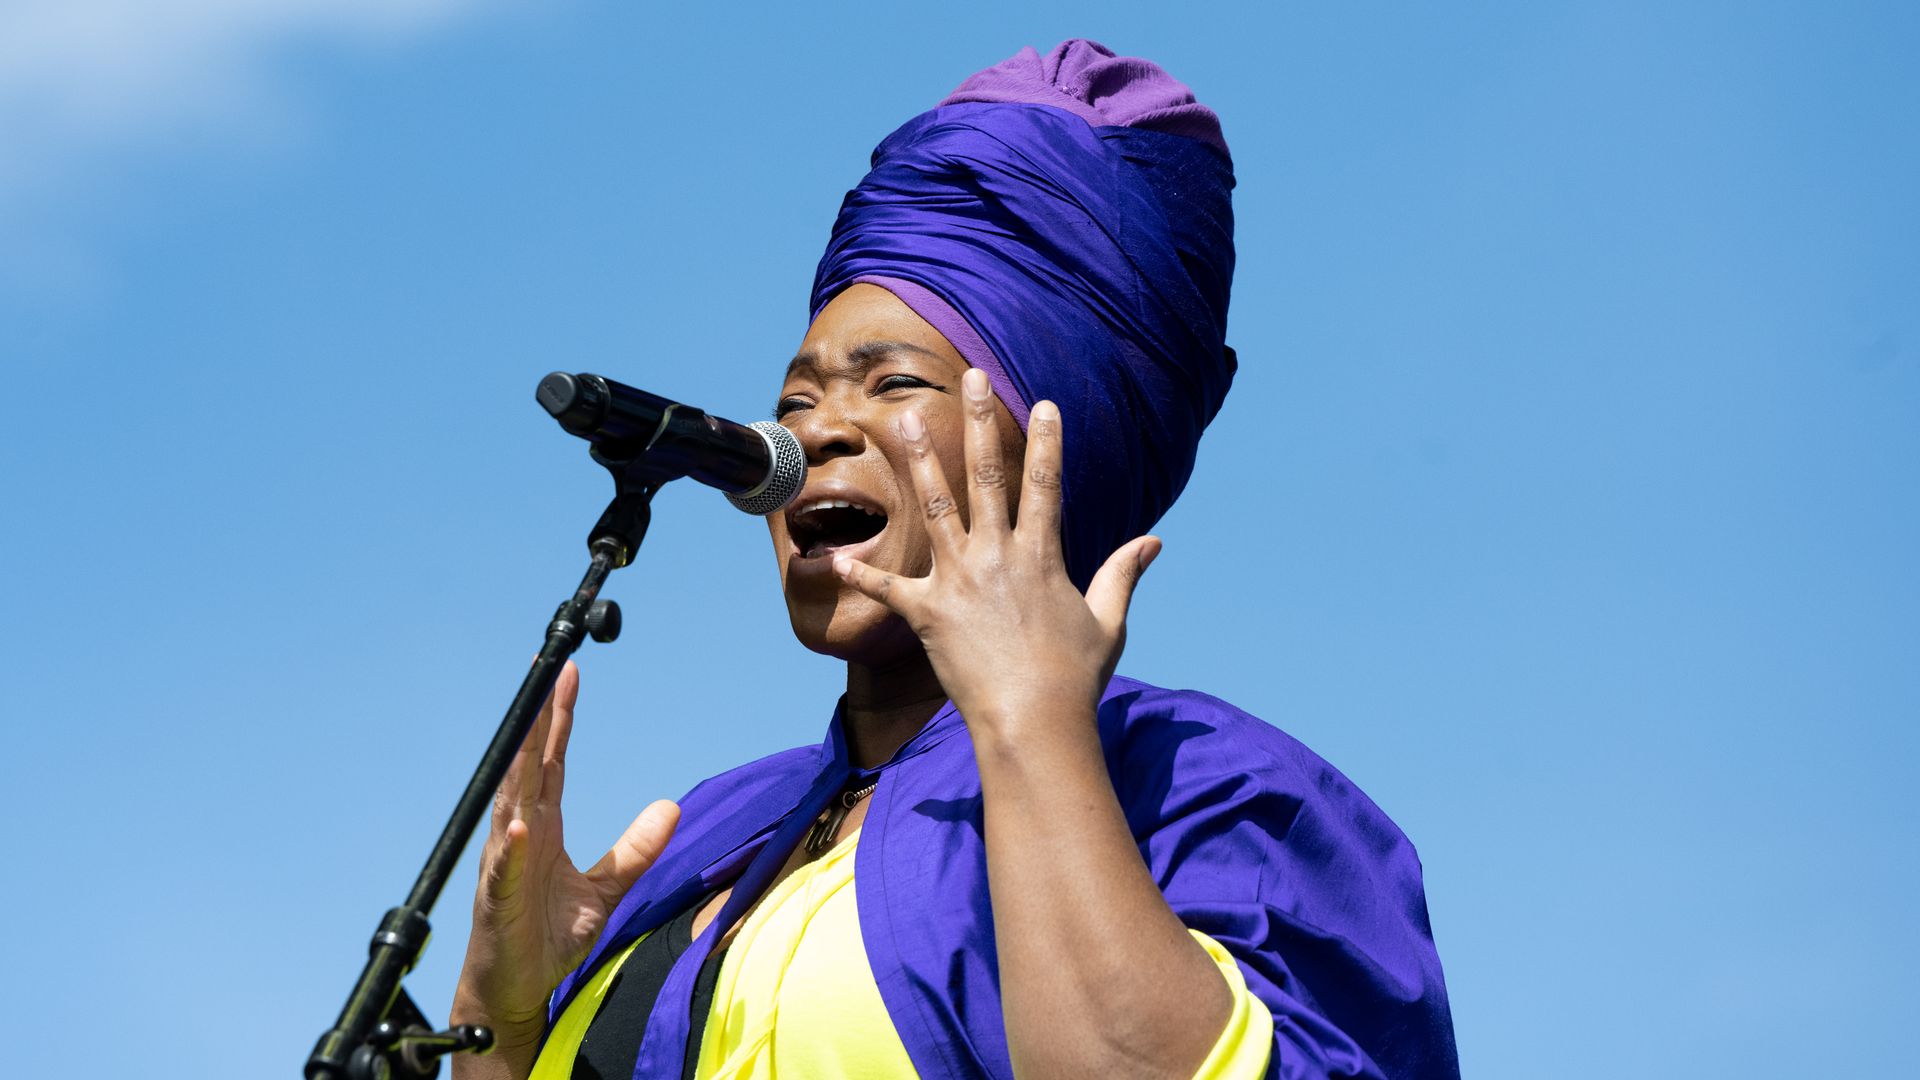 India.Arie wears a bright purple and yellow wrap while singing against a blue sky background